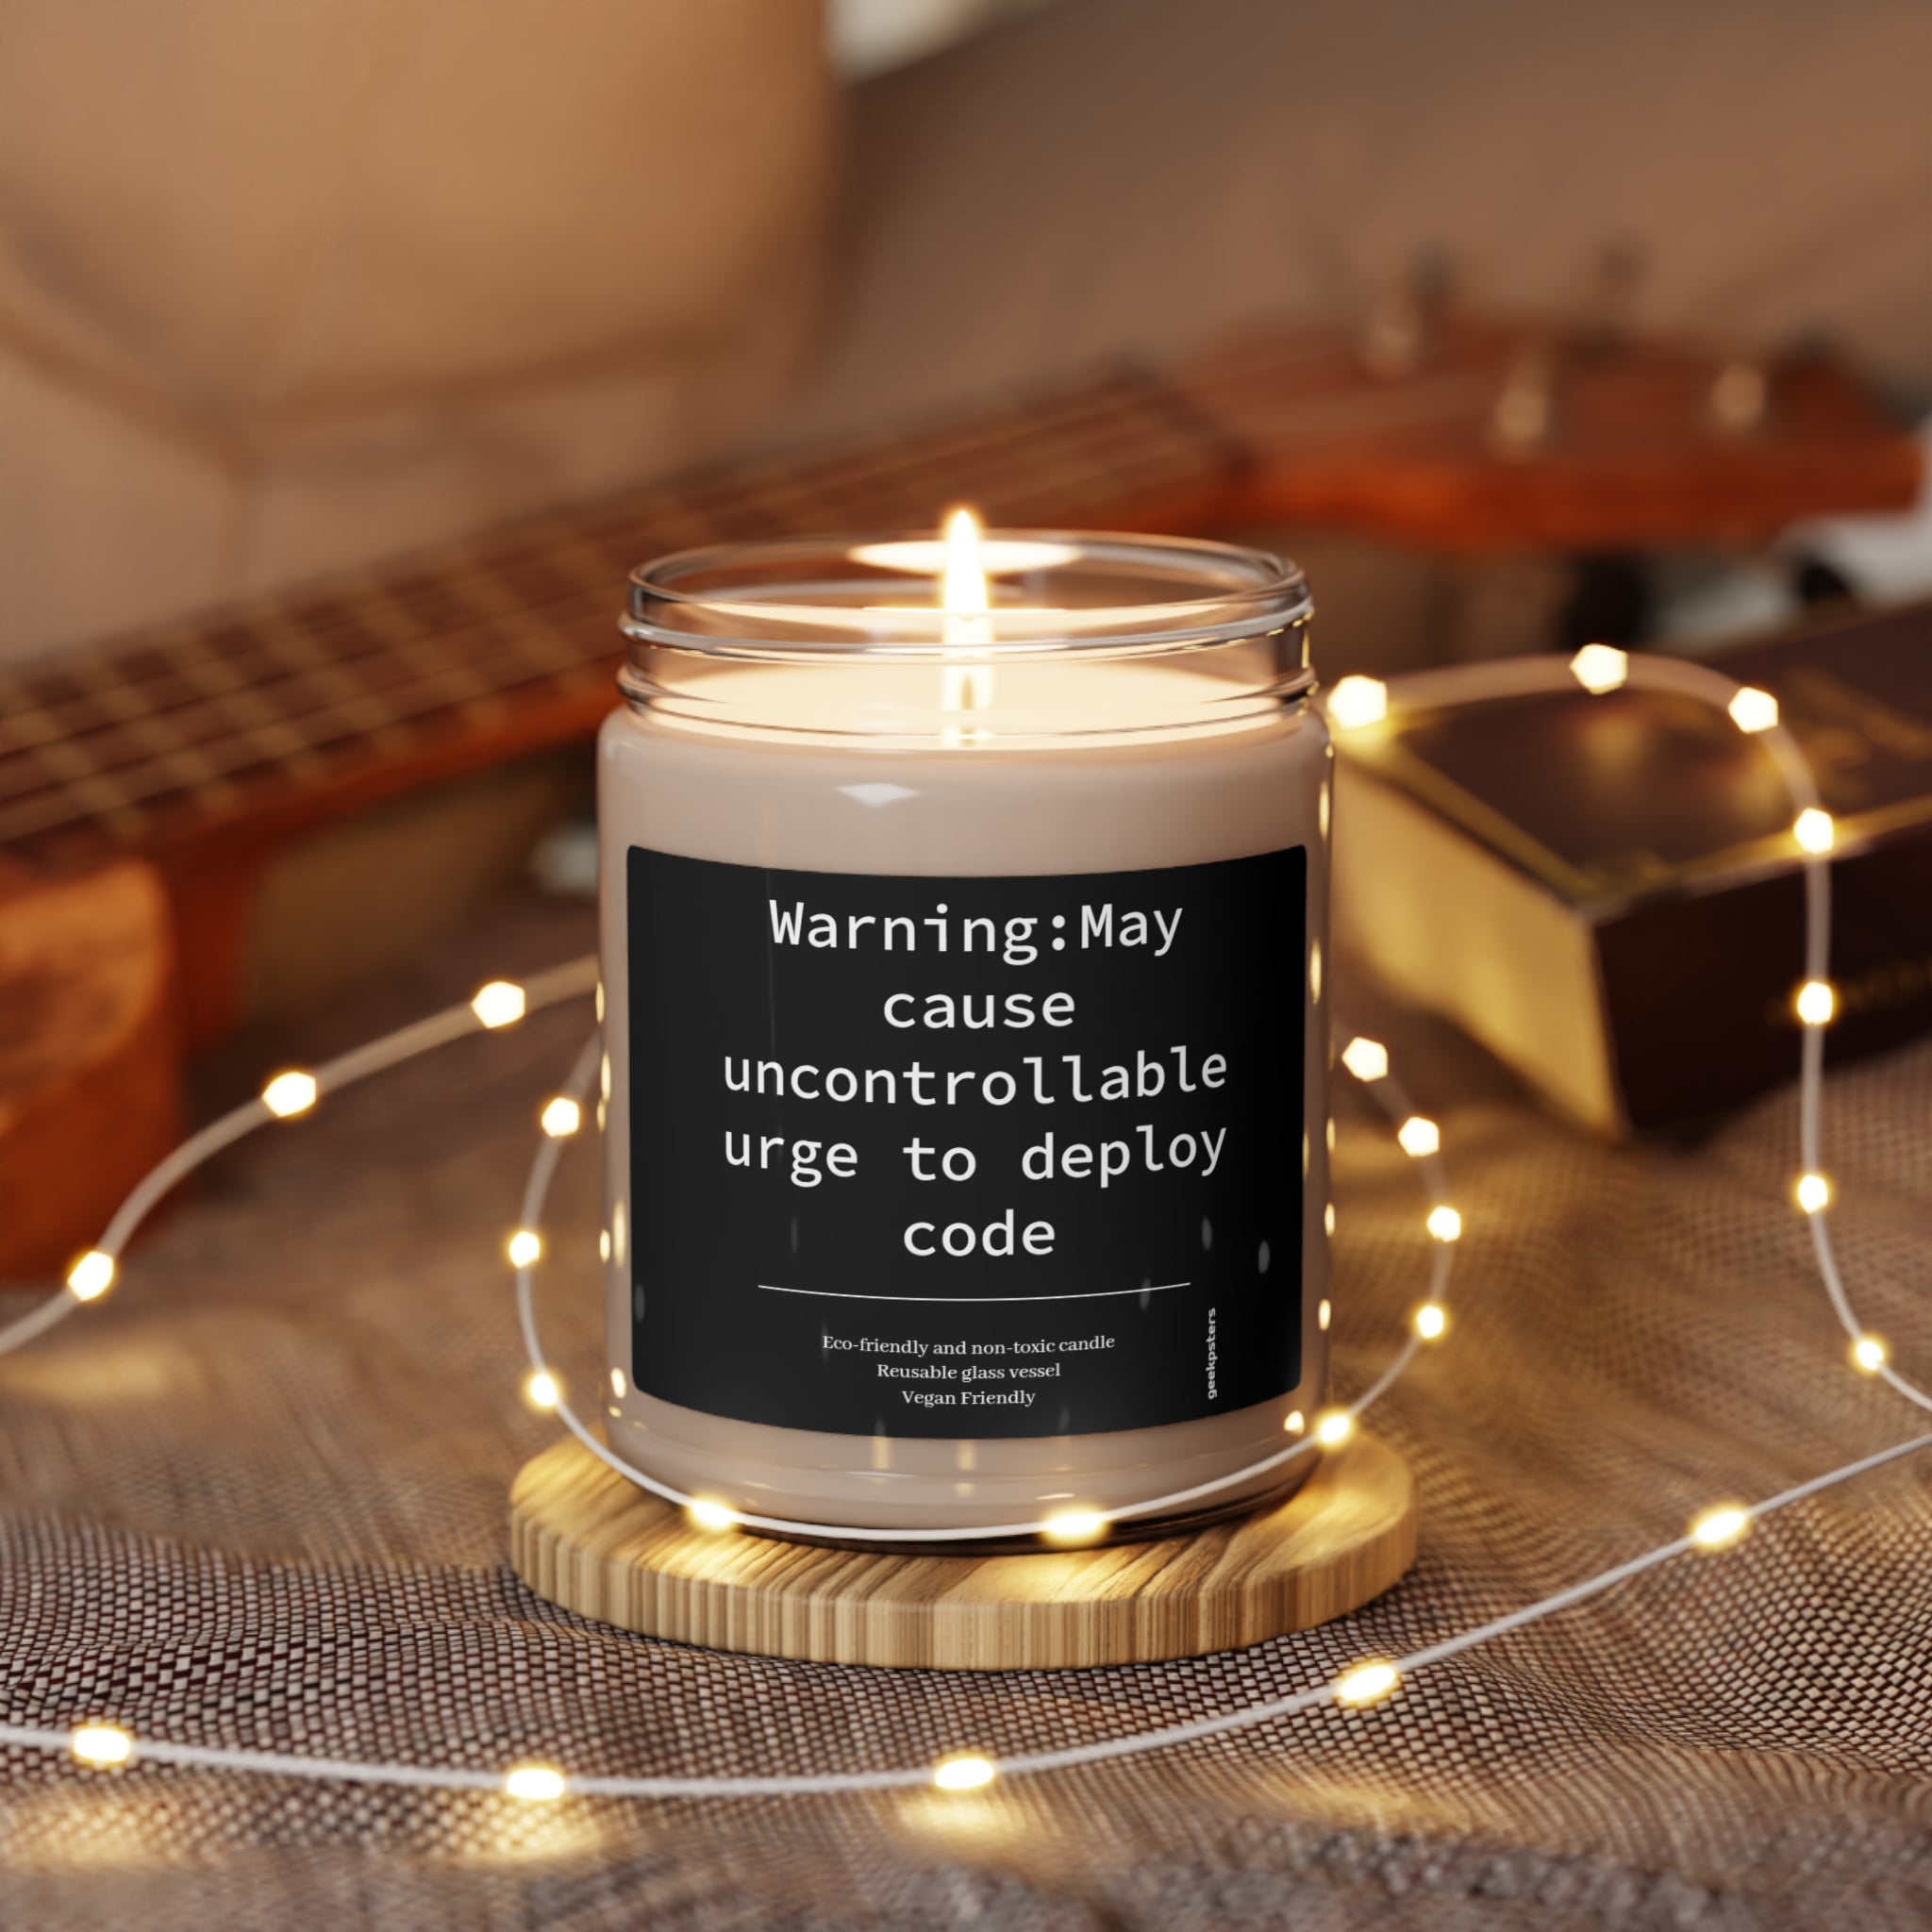 A Caution May Cause Urge to Deploy - Scented Soy Candle, 9oz with a humorous label warning that it may cause an uncontrollable urge to deploy code, placed on a table surrounded by string lights.